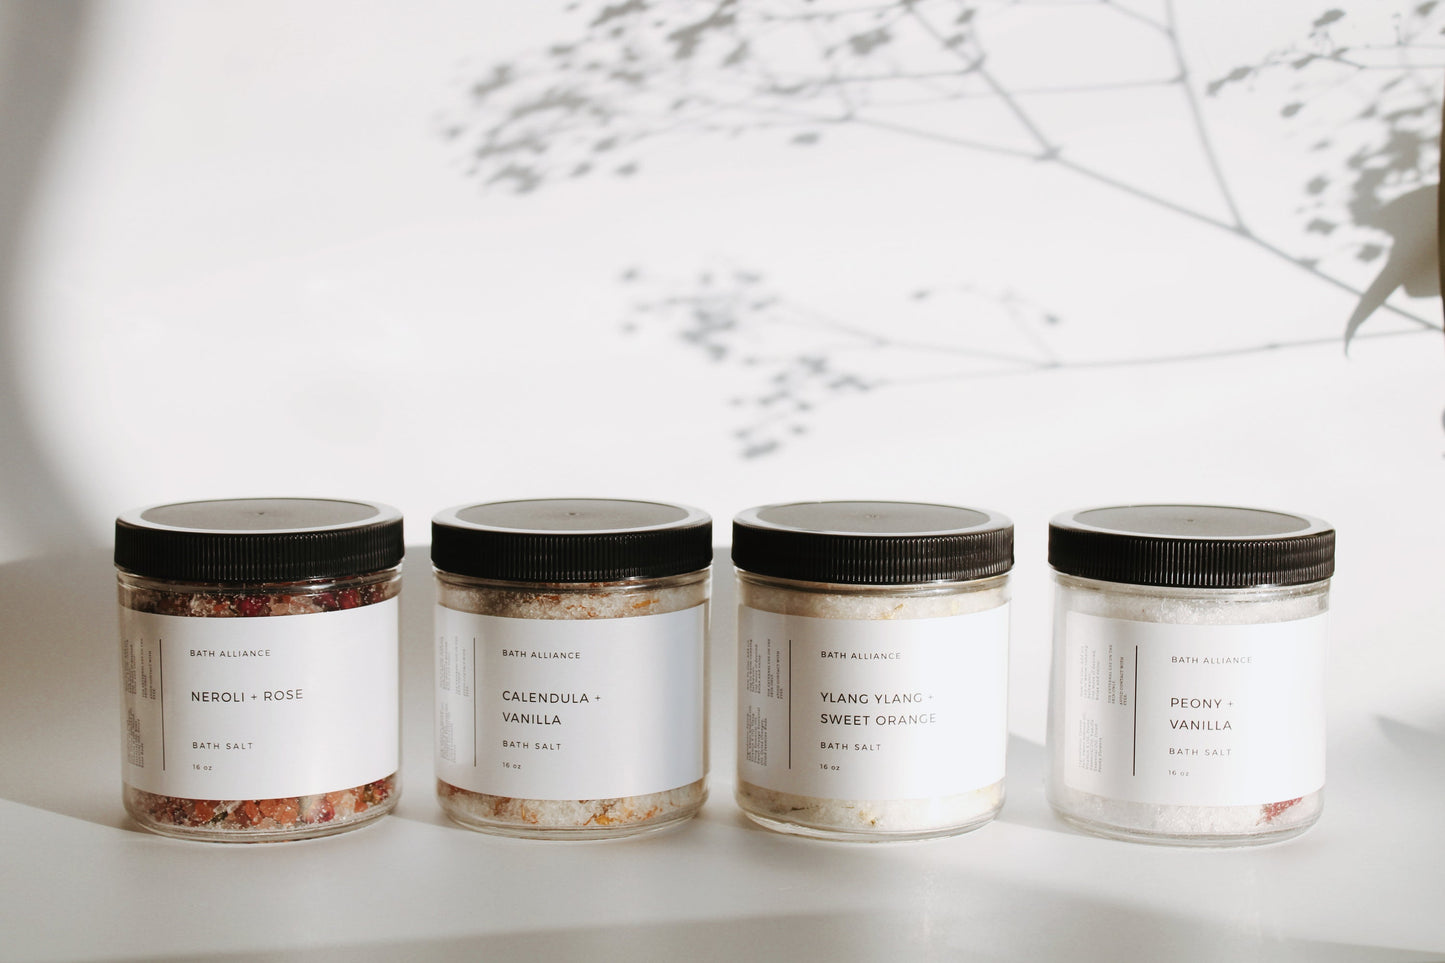 Four clear jars with dark lids, different bath salt mixtures in each of varying color. Each jar has a white label with the title written on it, "Neroli + Rose", "Calendula + Vanilla", "Ylang Ylang + Sweet Orange", and "Peony + Vanilla".